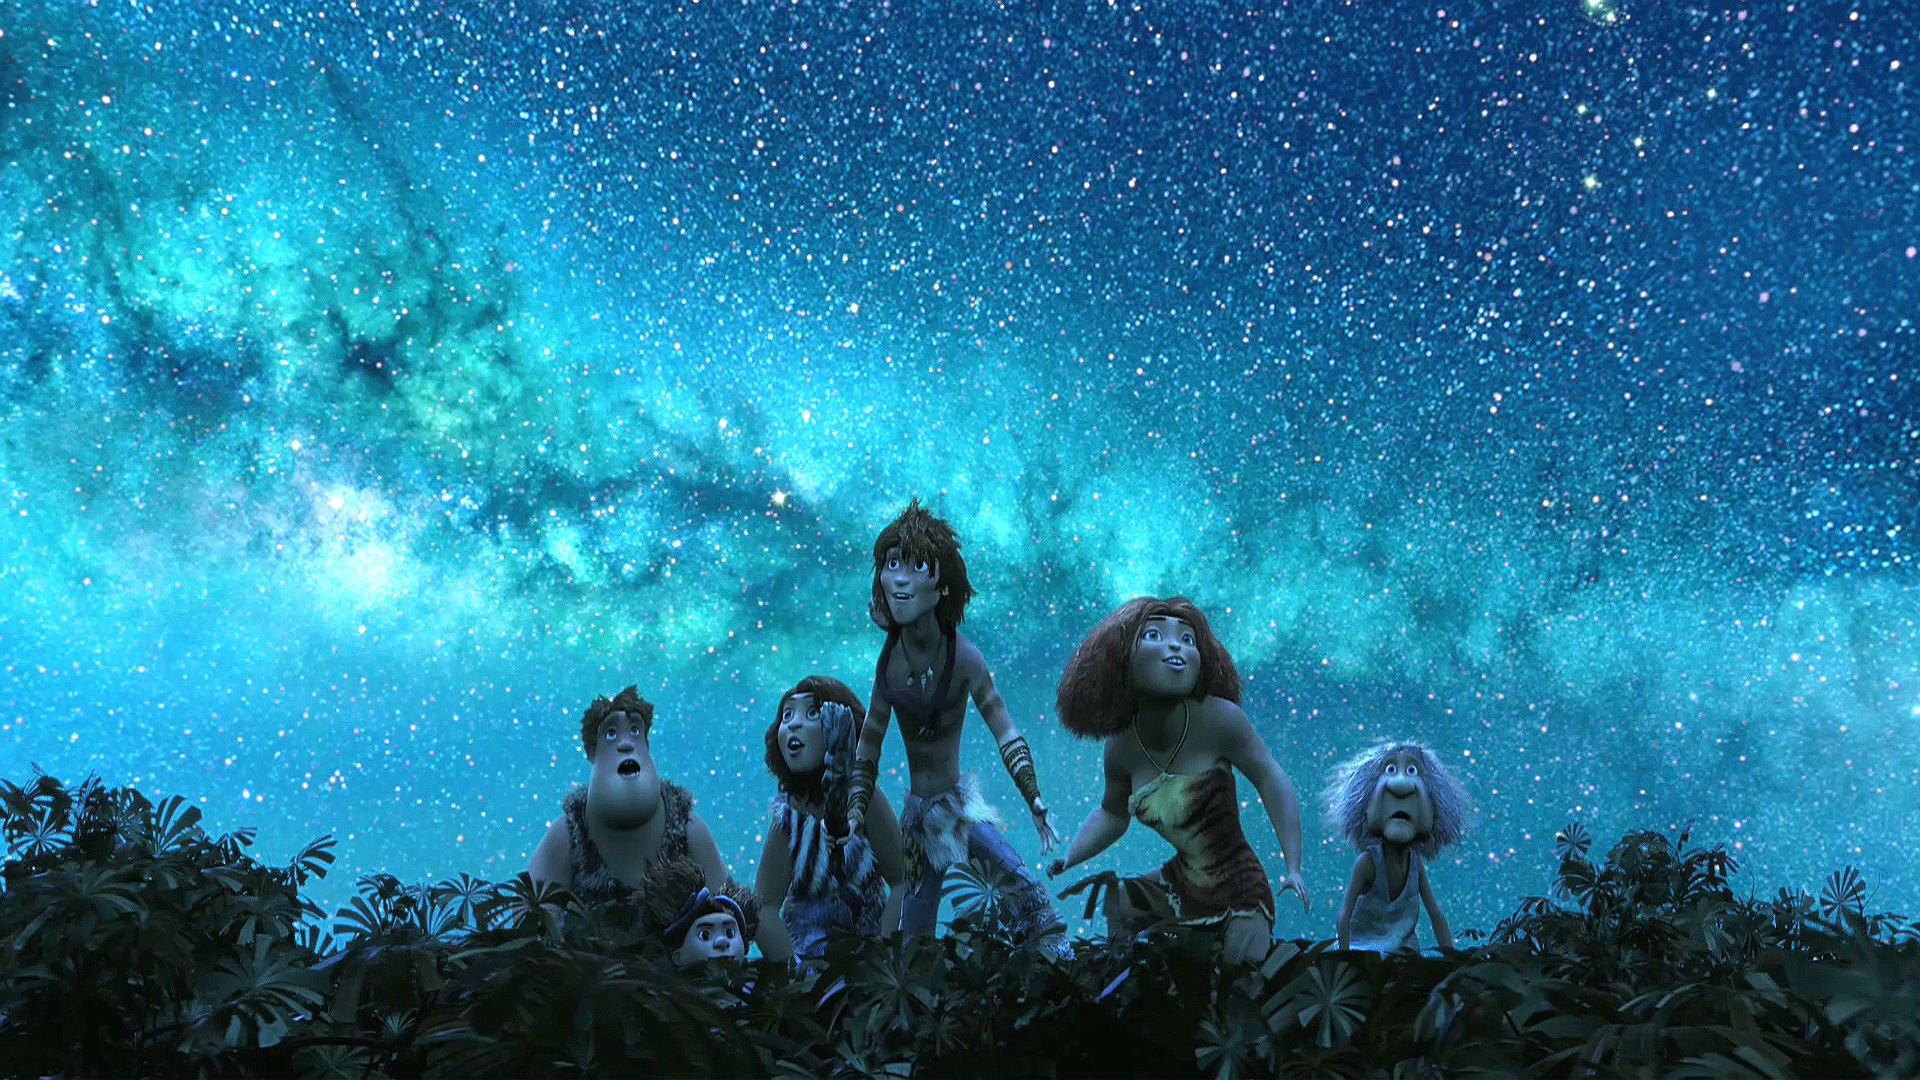 the, Croods, Animation, Adventure, Comedy, Family, Fantasy, 1croods